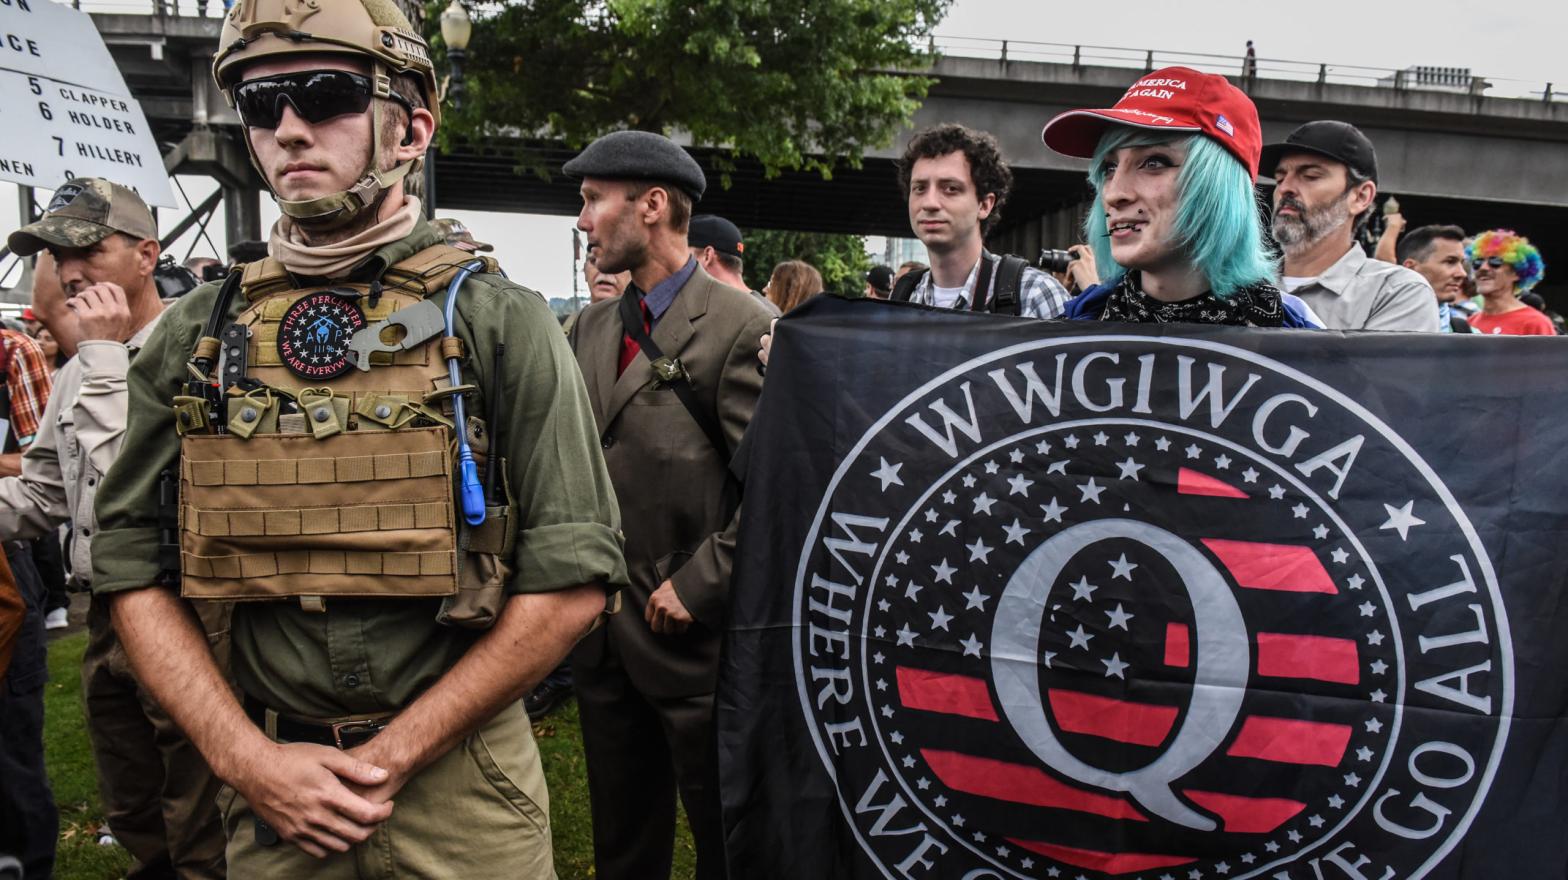 A QAnon banner at a far-right rally in August 2019 in Portland, Oregon. (Photo: Stephanie Keith, Getty Images)